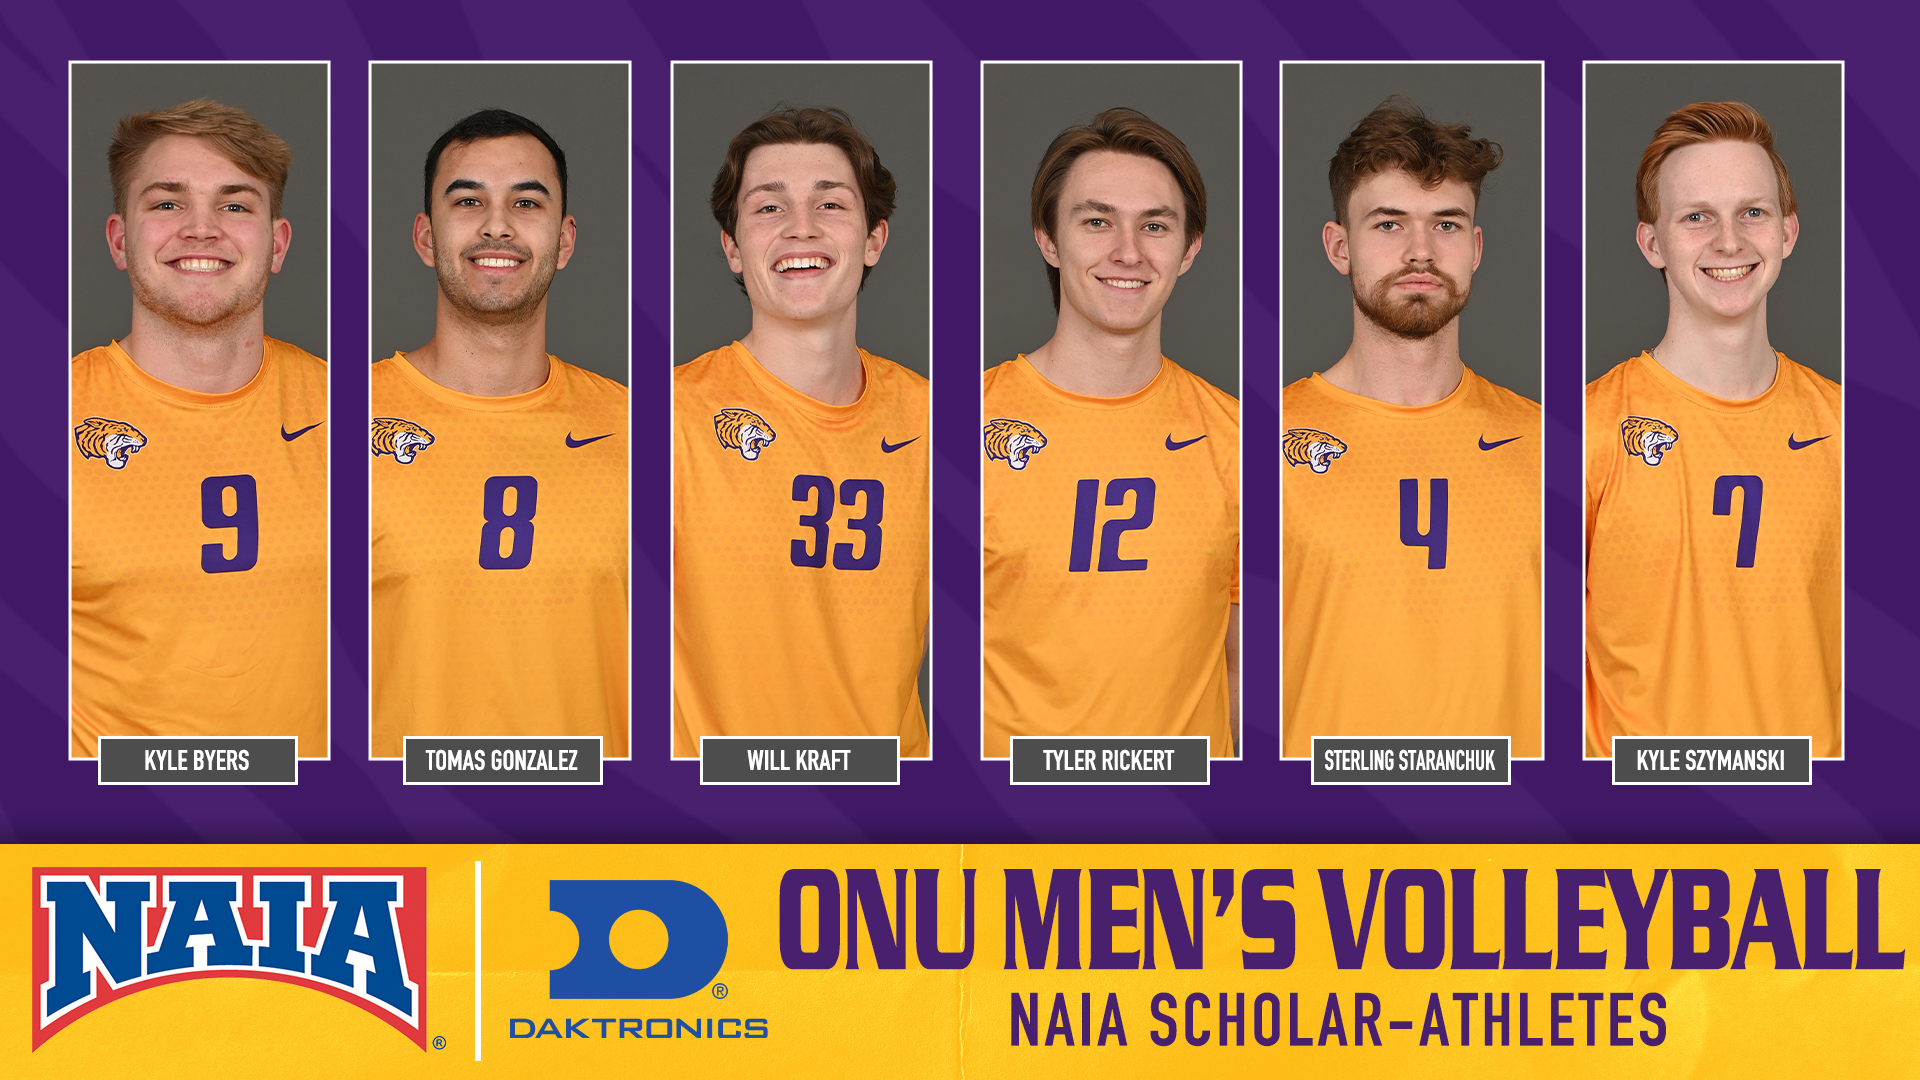 MEN’S VOLLEYBALL NAMES SIX TO NAIA SCHOLAR-ATHLETE HONOR ROLL